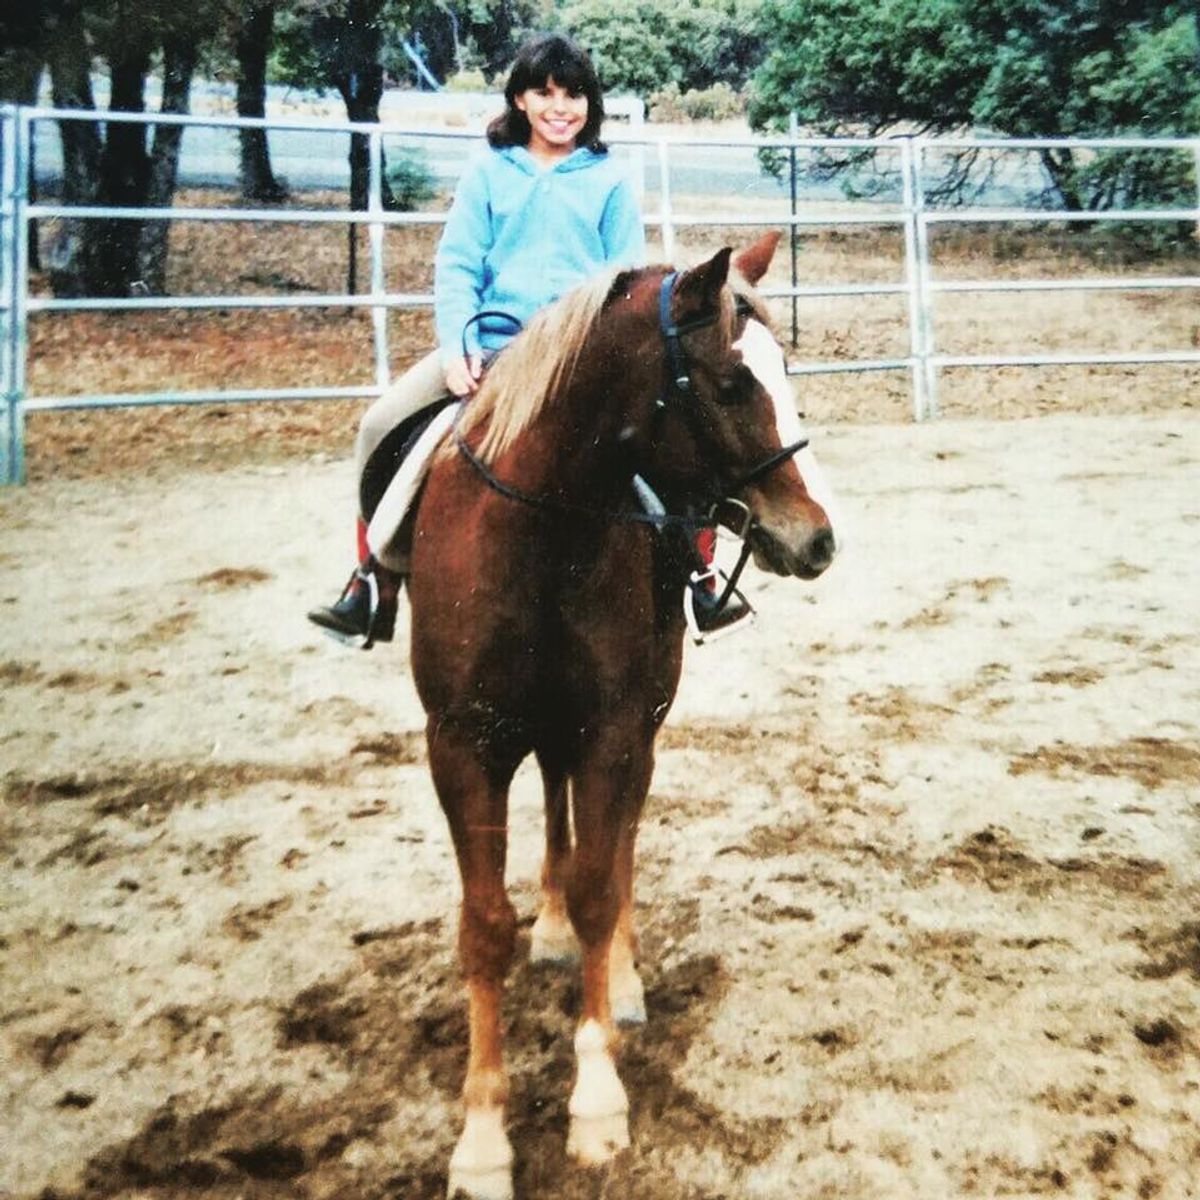 Growing Up A "Horse Girl"